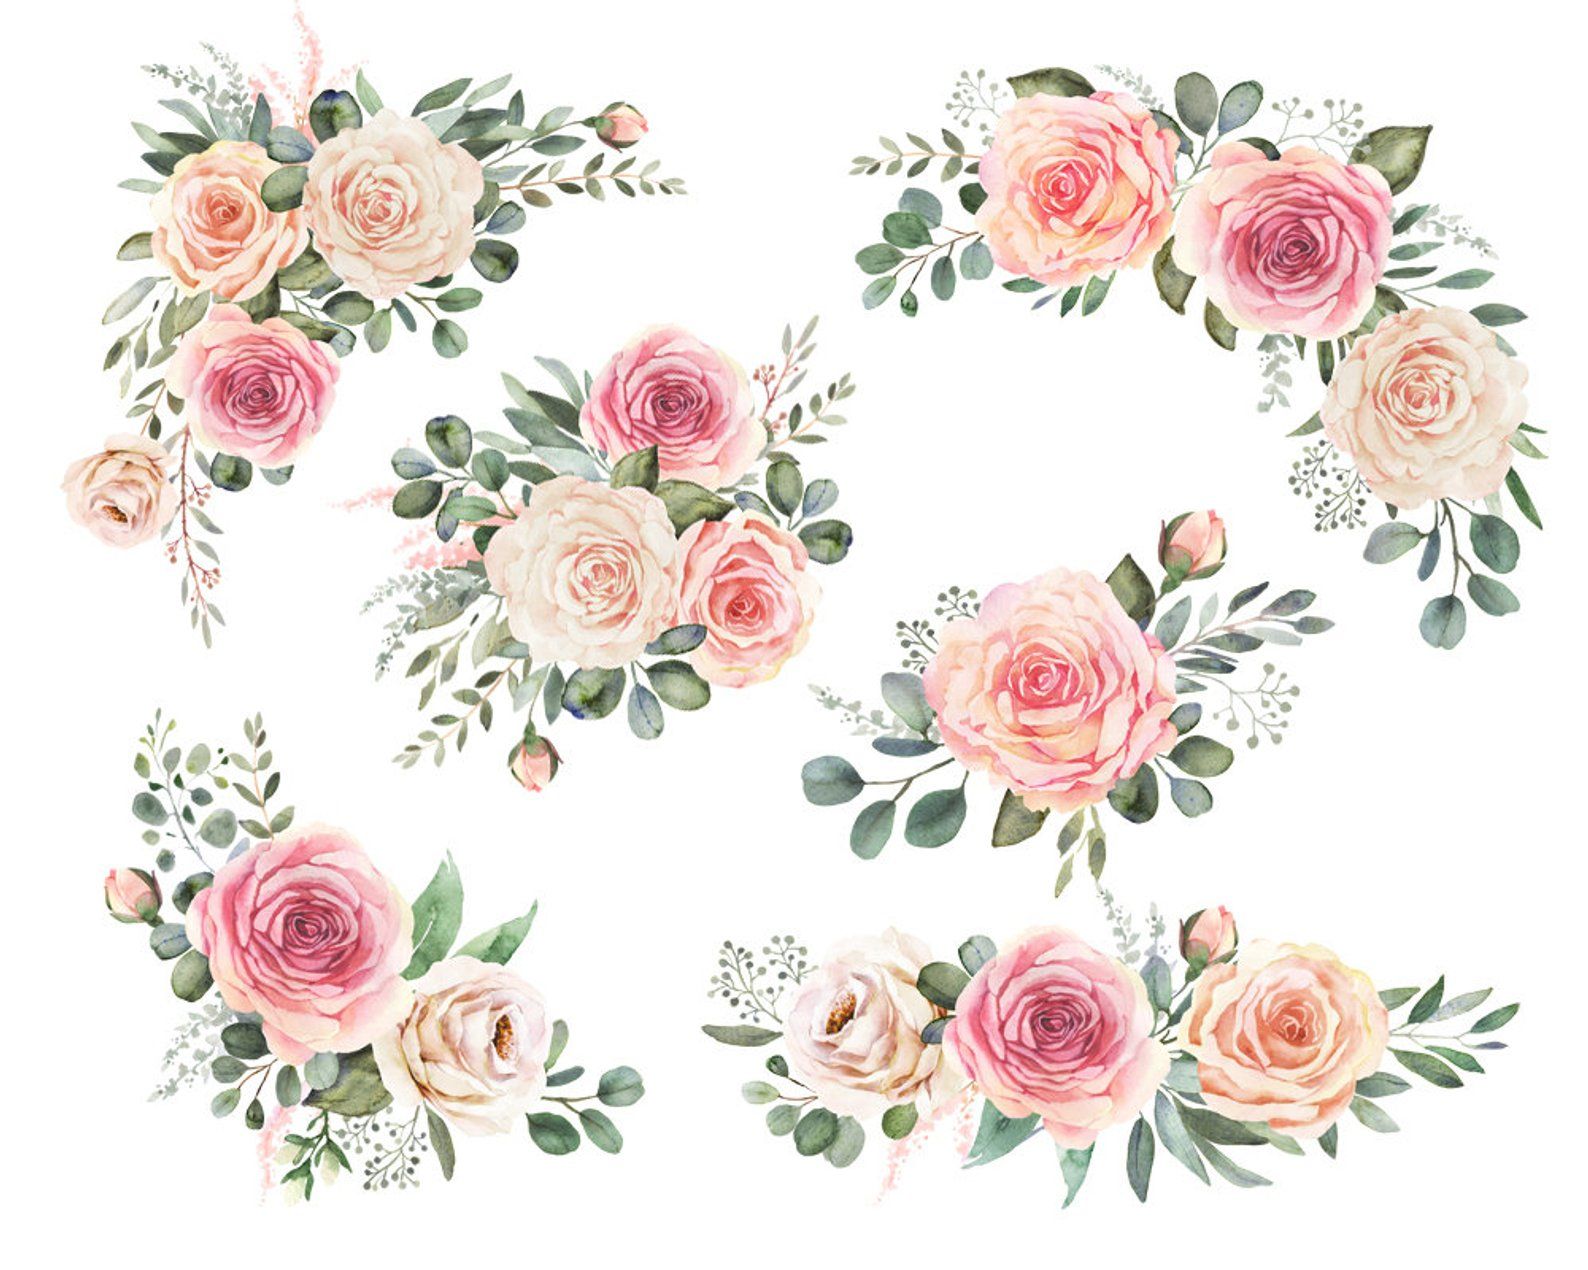 Elegant watercolor clipart with roses and eucalyptus